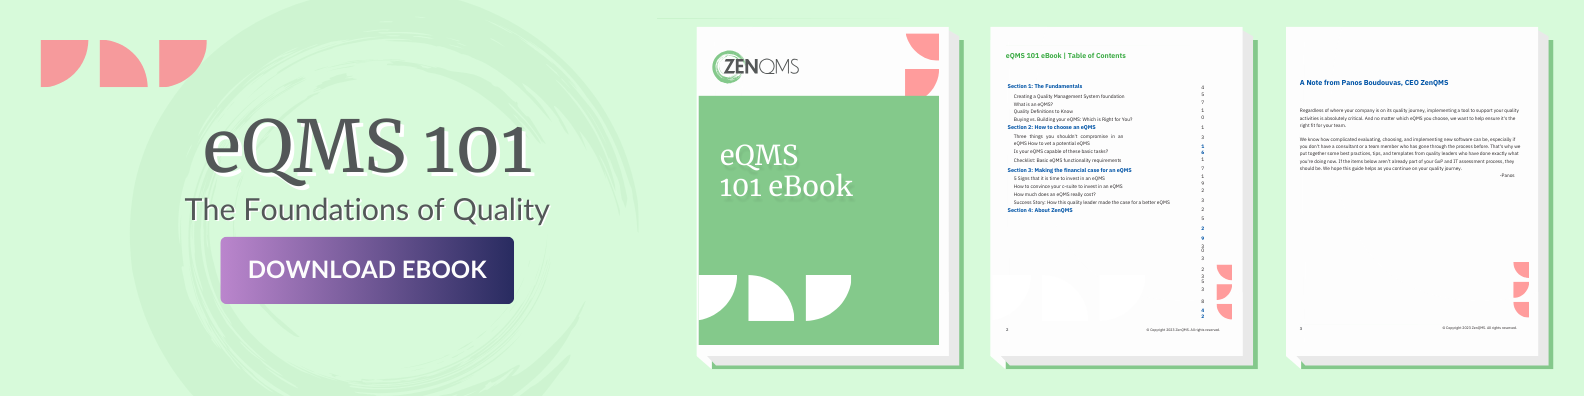 Do_you_know_the_right_questions_to_ask_to_uncover_the_real_cost_of_an_eQMS_Download_the_eQMS_Cost_Comparison_Worksheet_to_track_the_price_info_you_can_t_afford_to_miss.